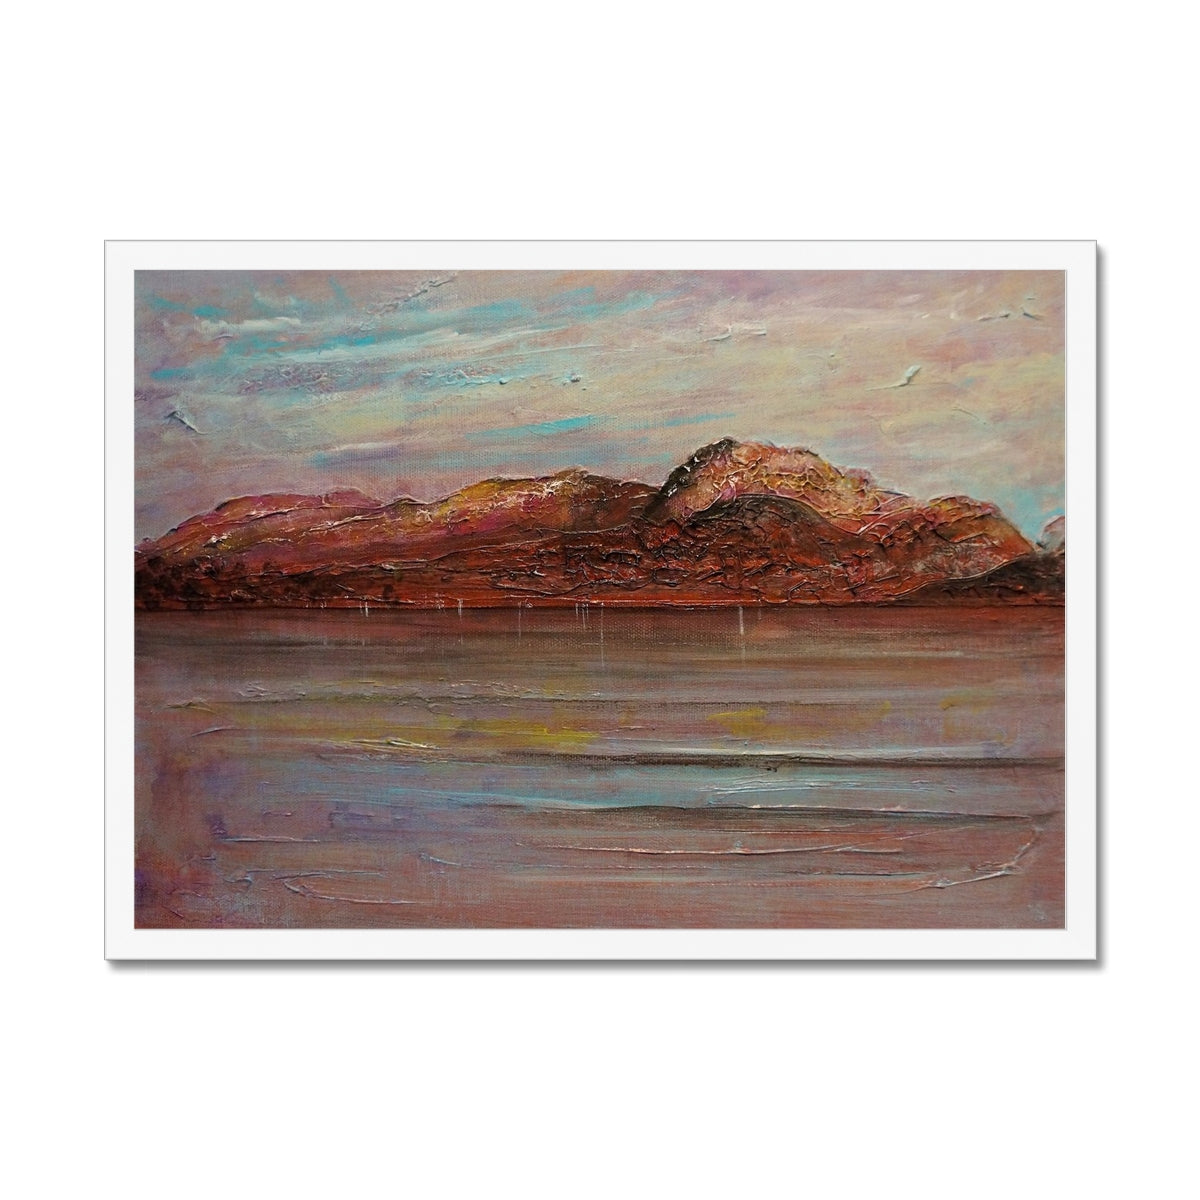 Ben Nevis Painting | Framed Prints From Scotland-Framed Prints-Scottish Lochs & Mountains Art Gallery-A2 Landscape-White Frame-Paintings, Prints, Homeware, Art Gifts From Scotland By Scottish Artist Kevin Hunter